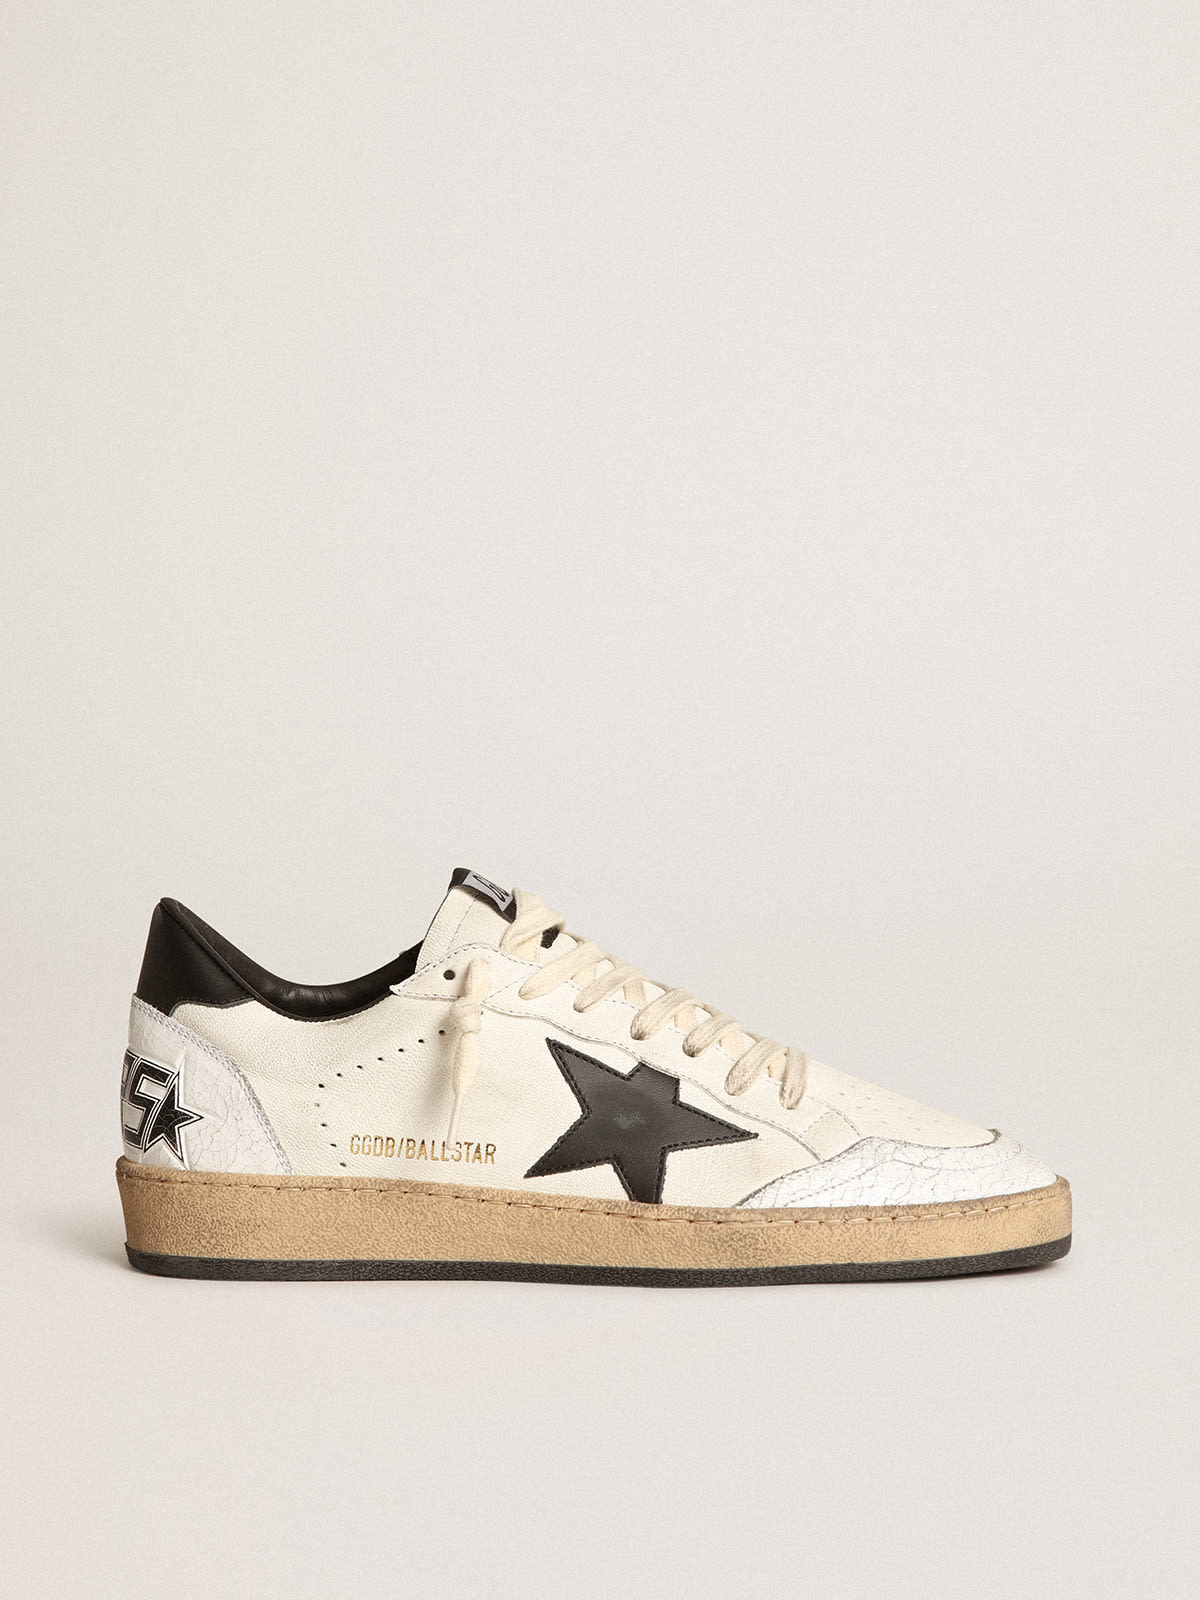 Golden Goose - Women's Ball Star in nappa with black star and black heel tab in 